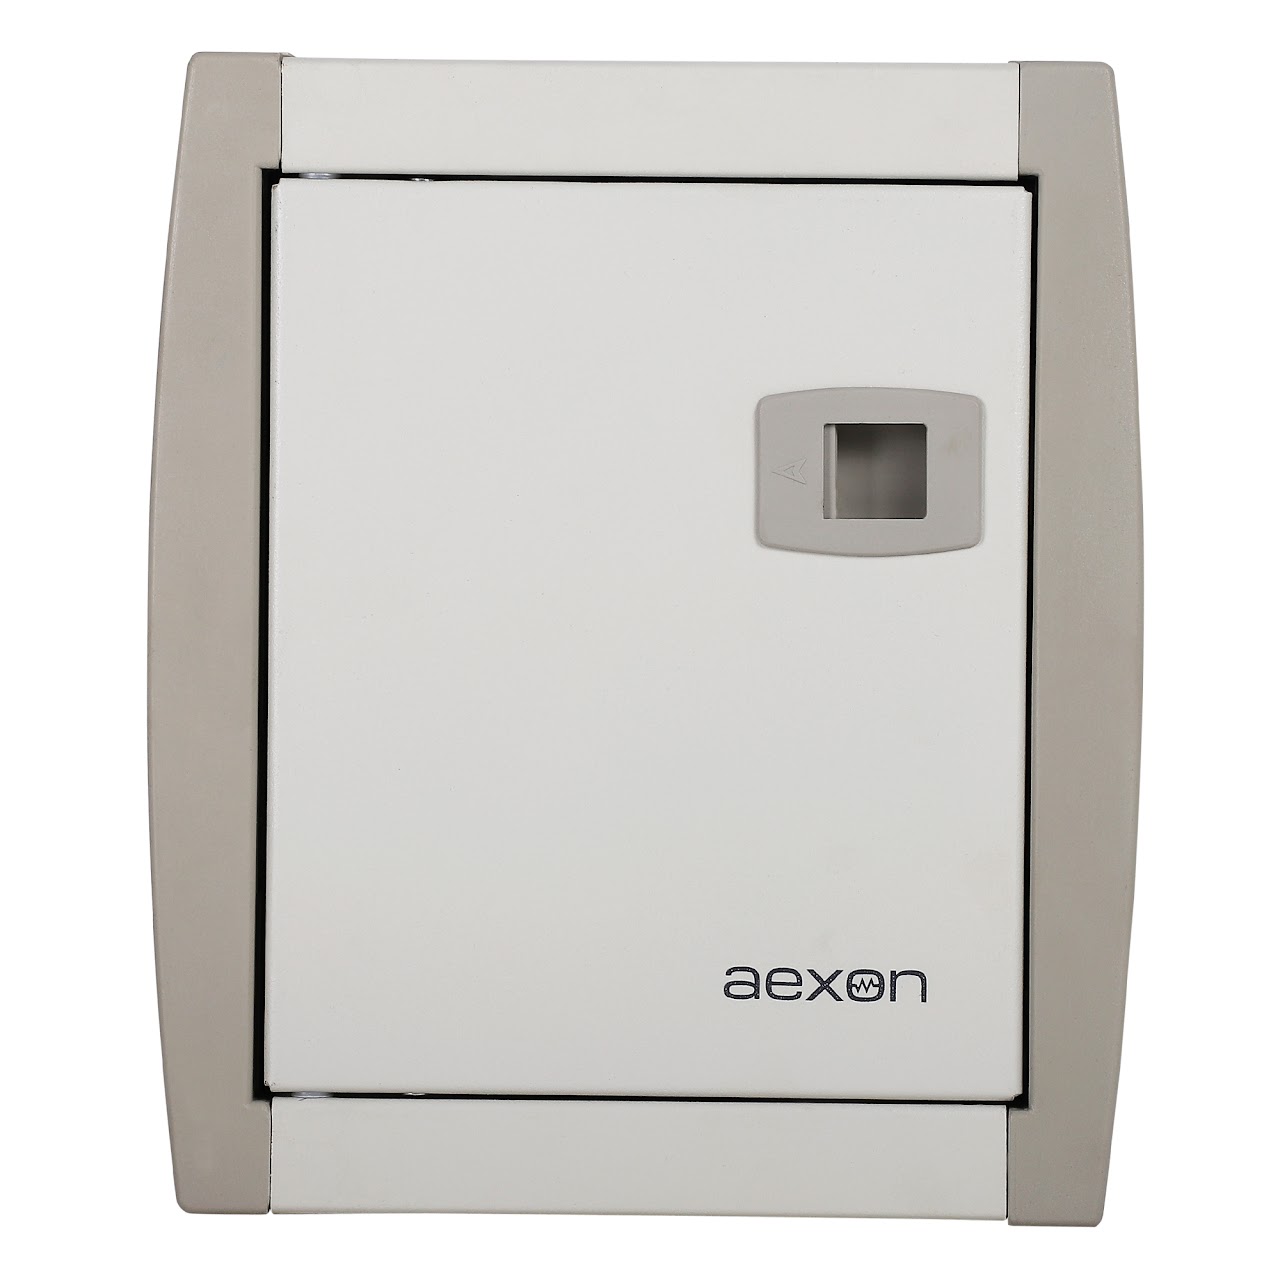 Aexon Compact MCB distribution boards for both SPN and TPN